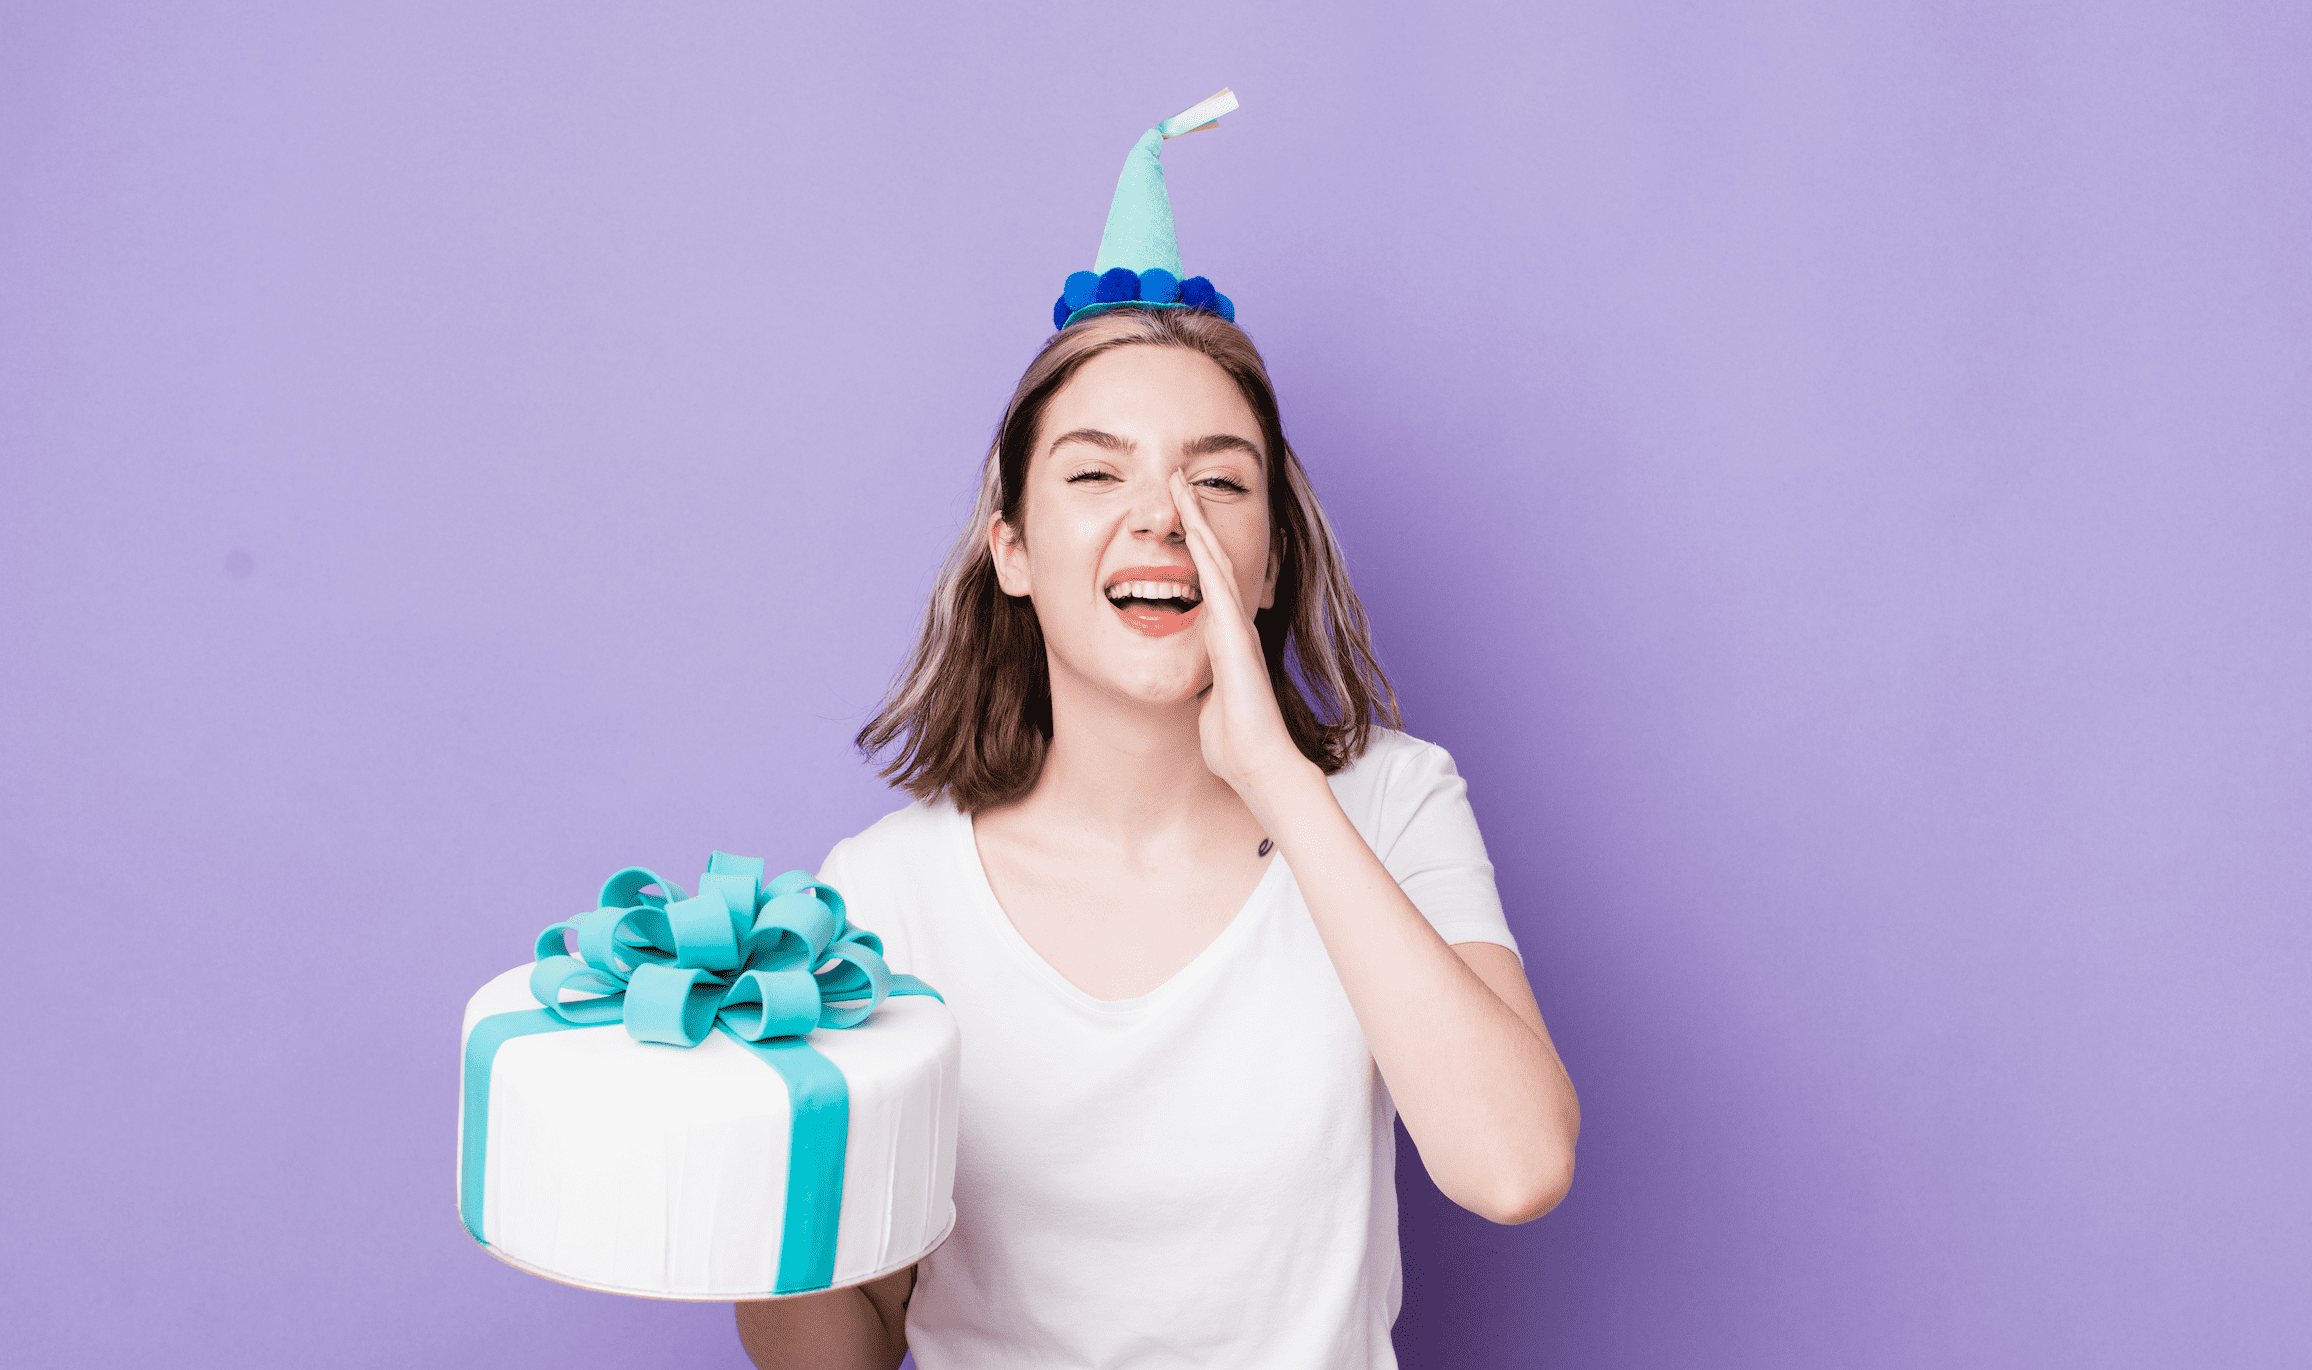 How to organize a birthday for an adult